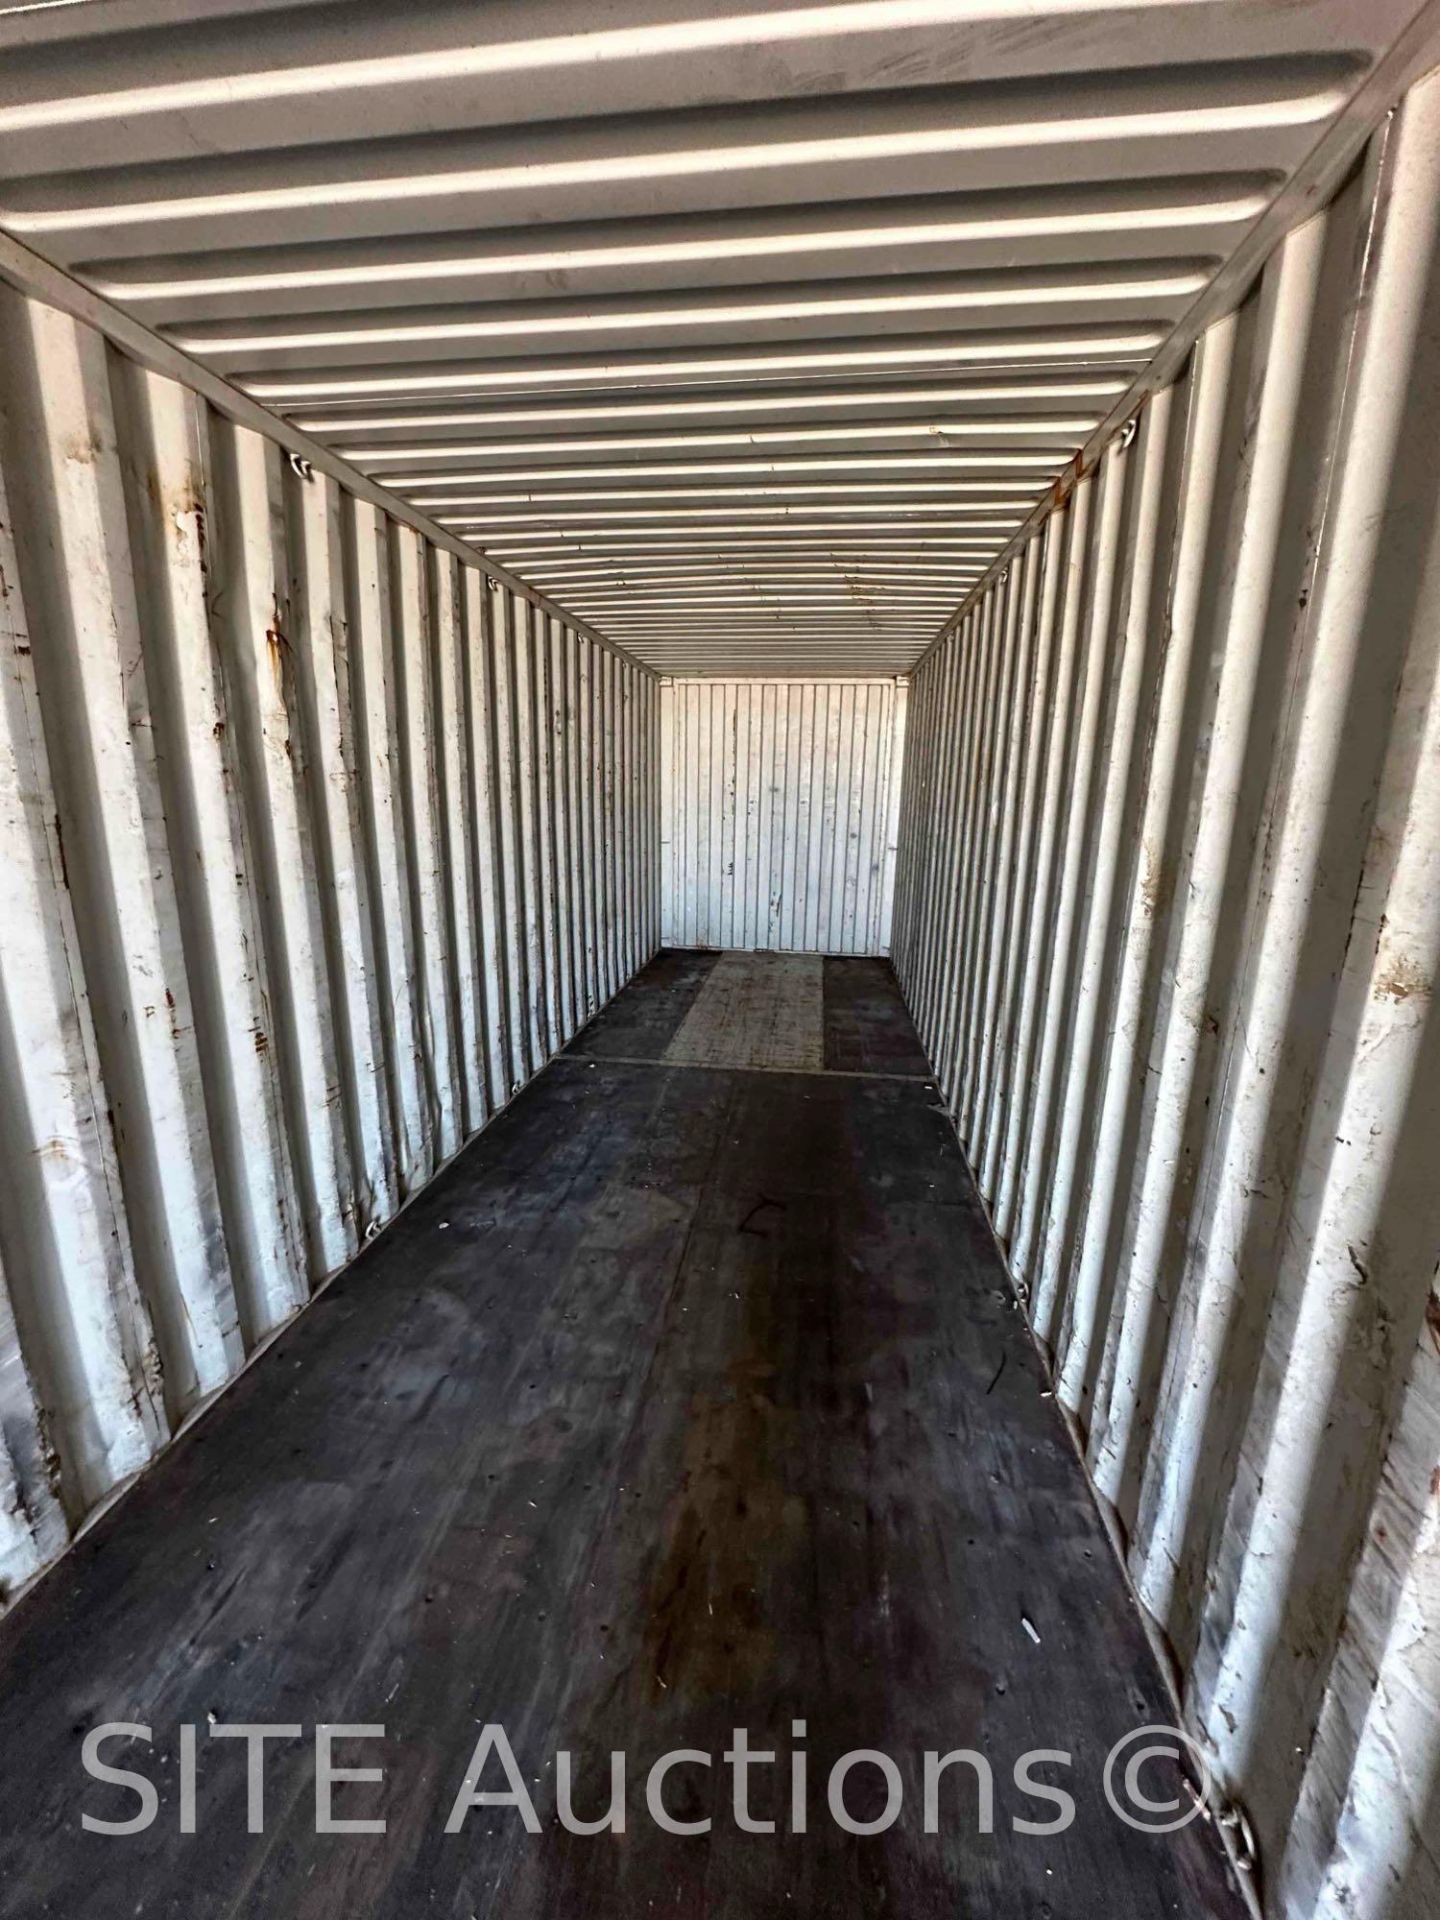 TAL International 40ft. Shipping Container - Image 9 of 10